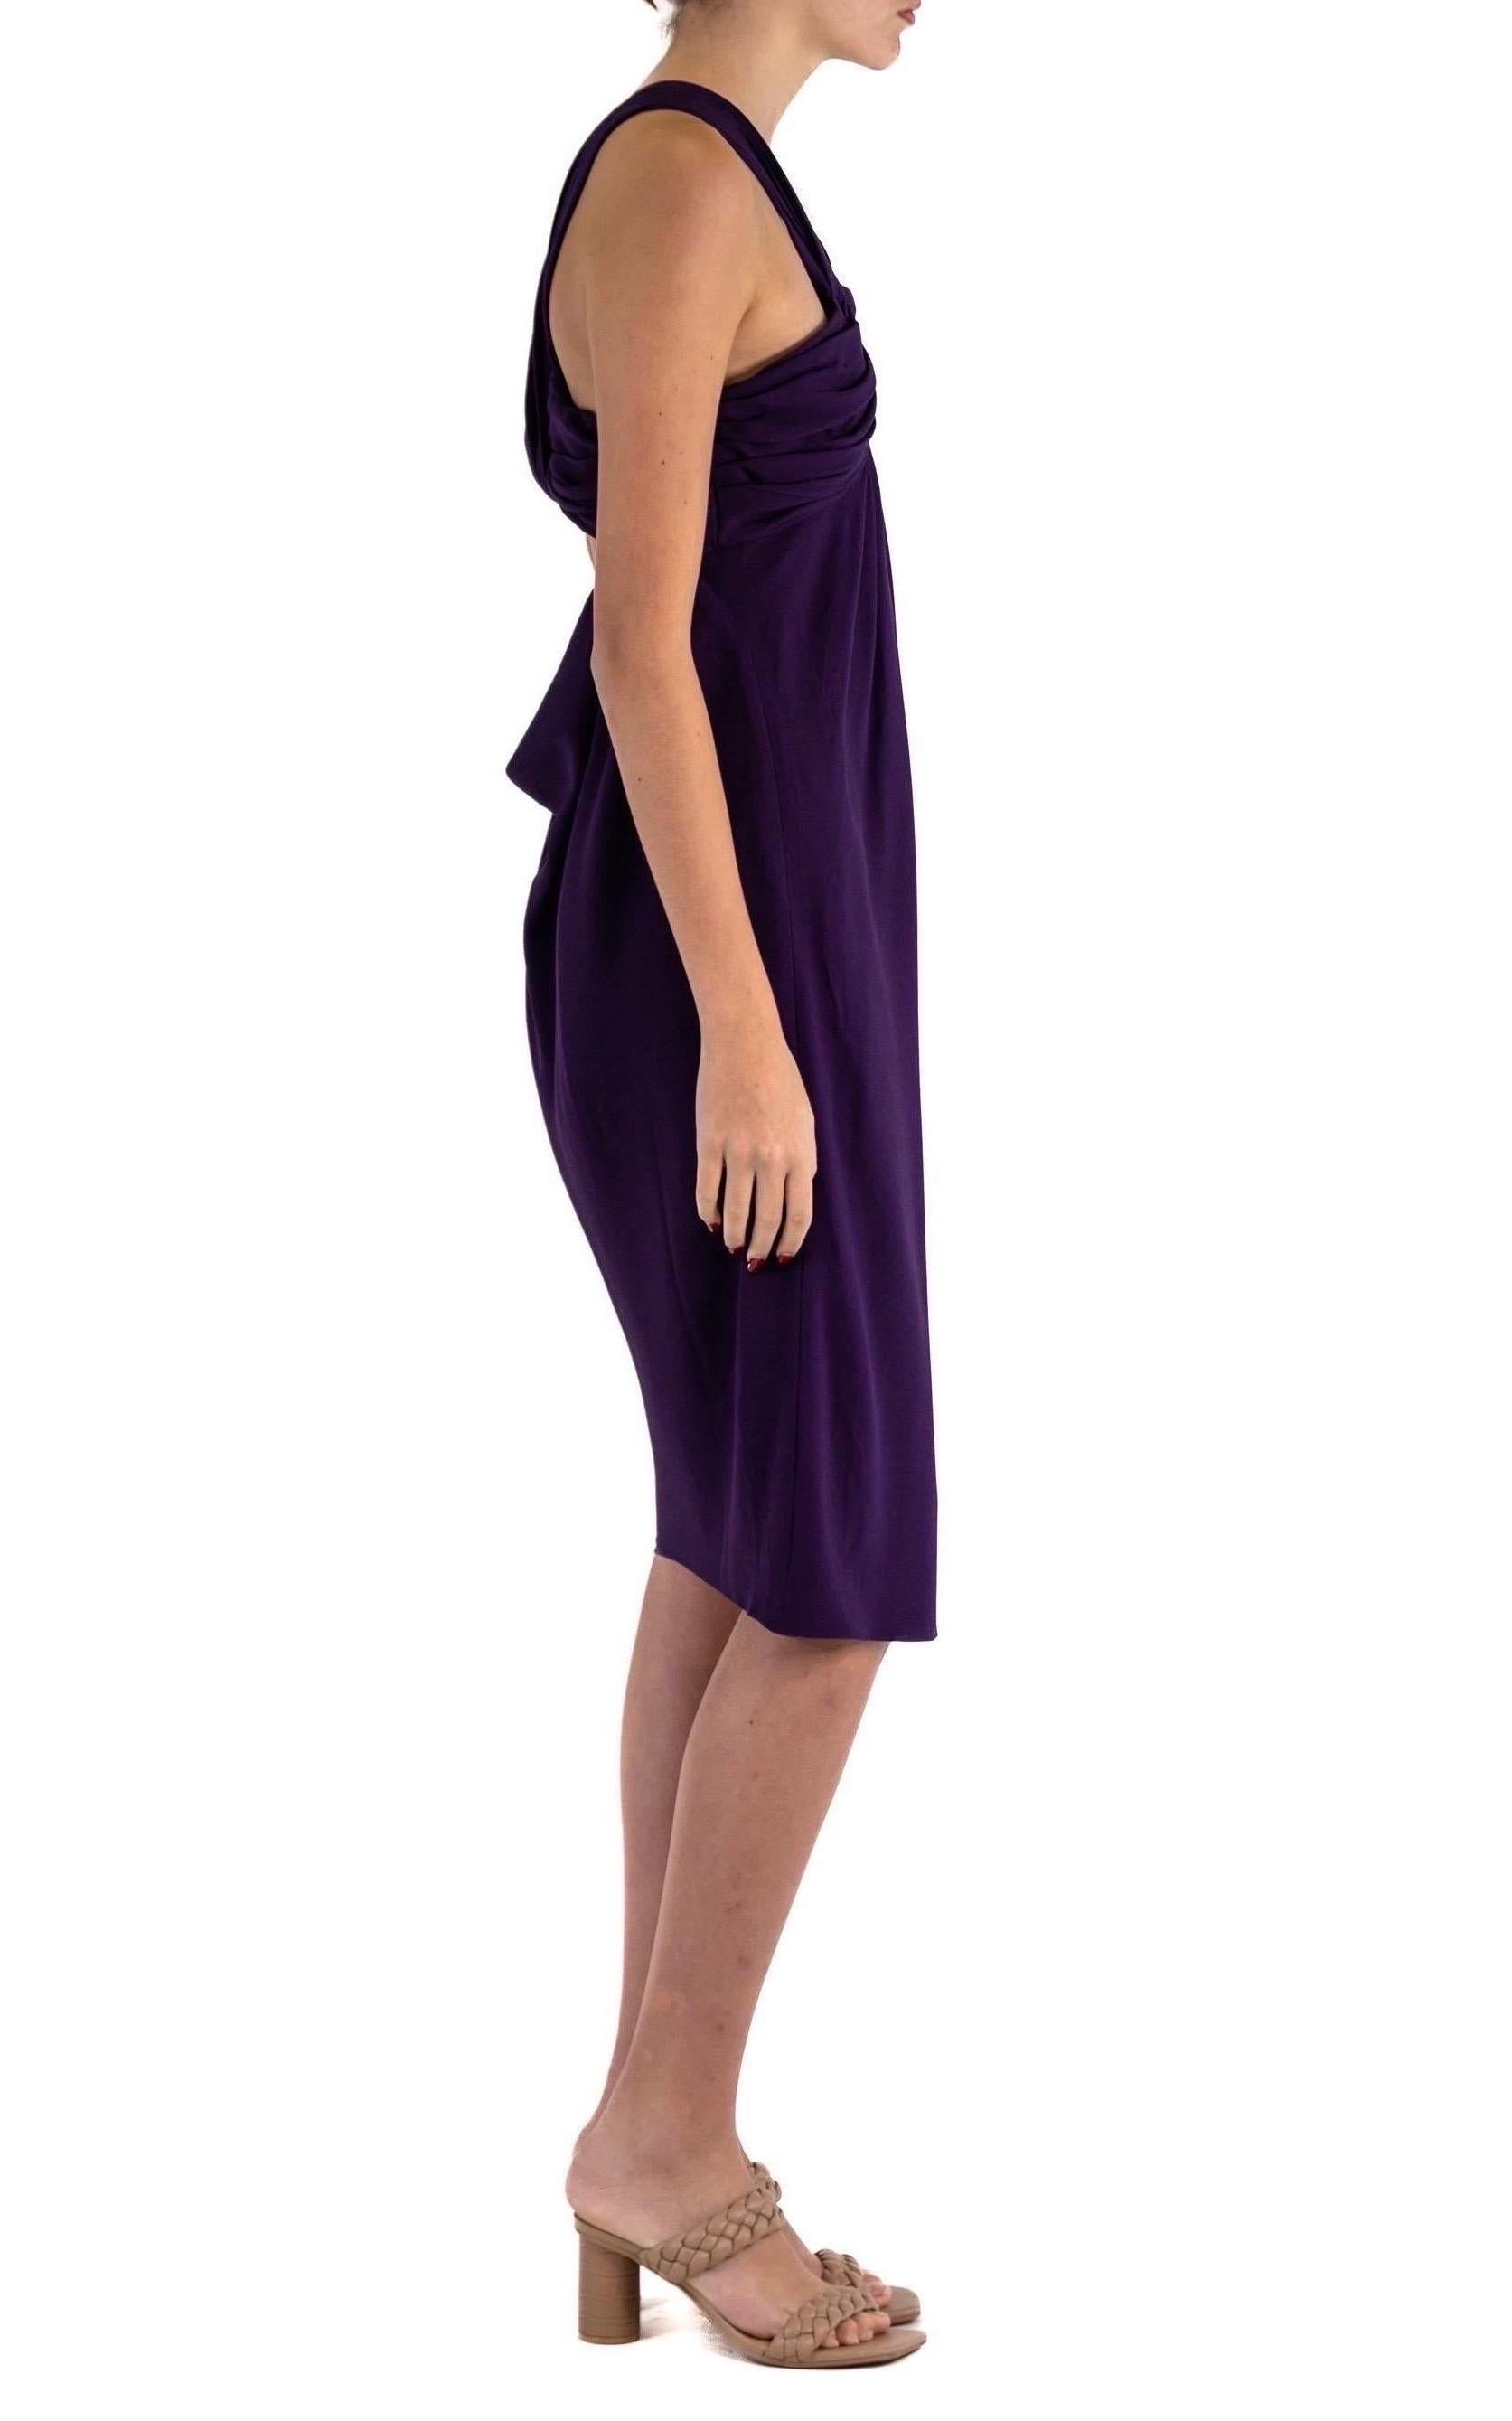 1990S JOHN GALLIANO CHRISTIAN DIOR Purple Rayon & Silk Chiffon Cocktail Dress W In Excellent Condition For Sale In New York, NY